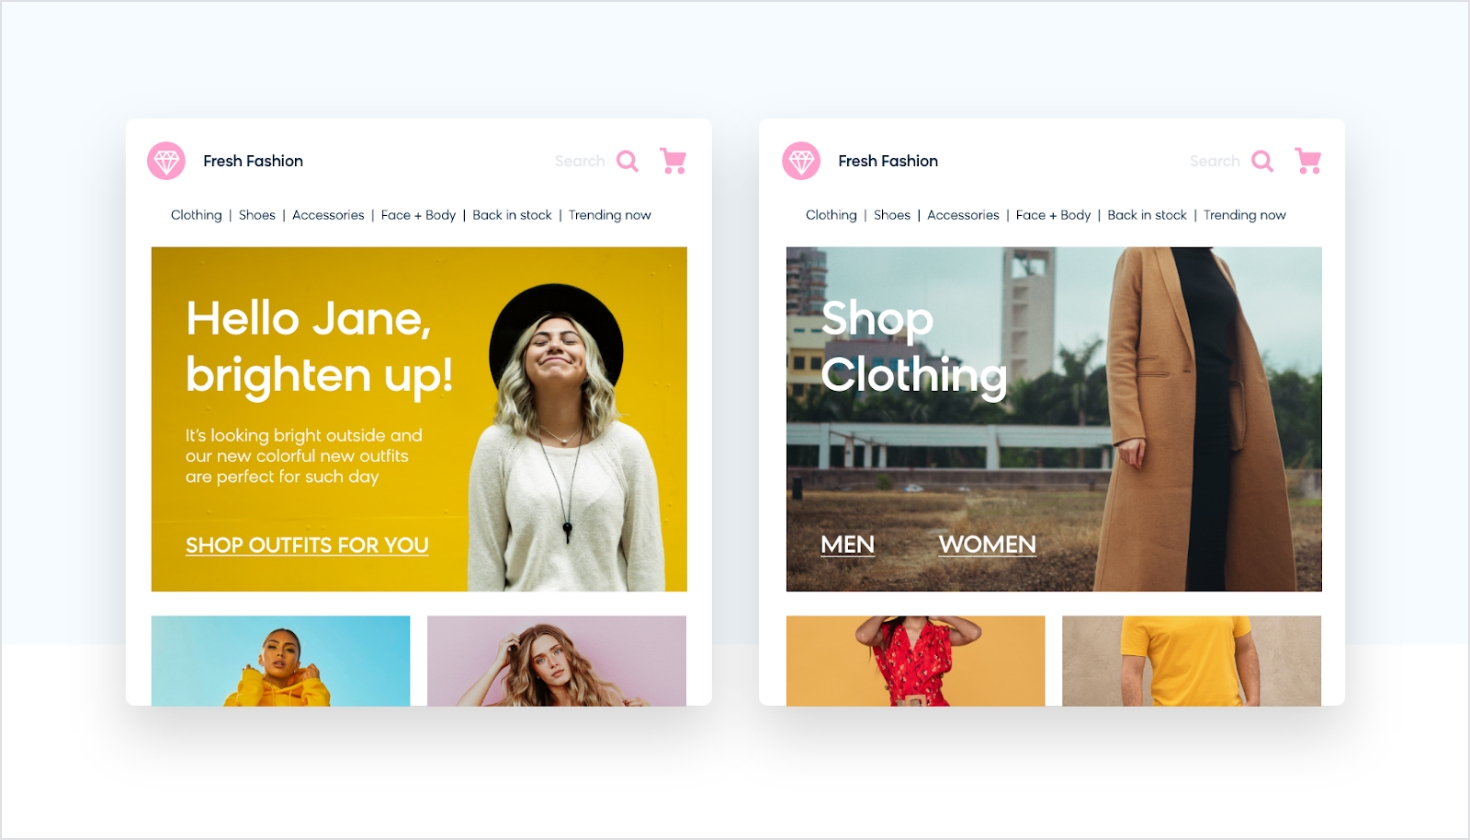 Personalized versions of an e-commerce fashion site